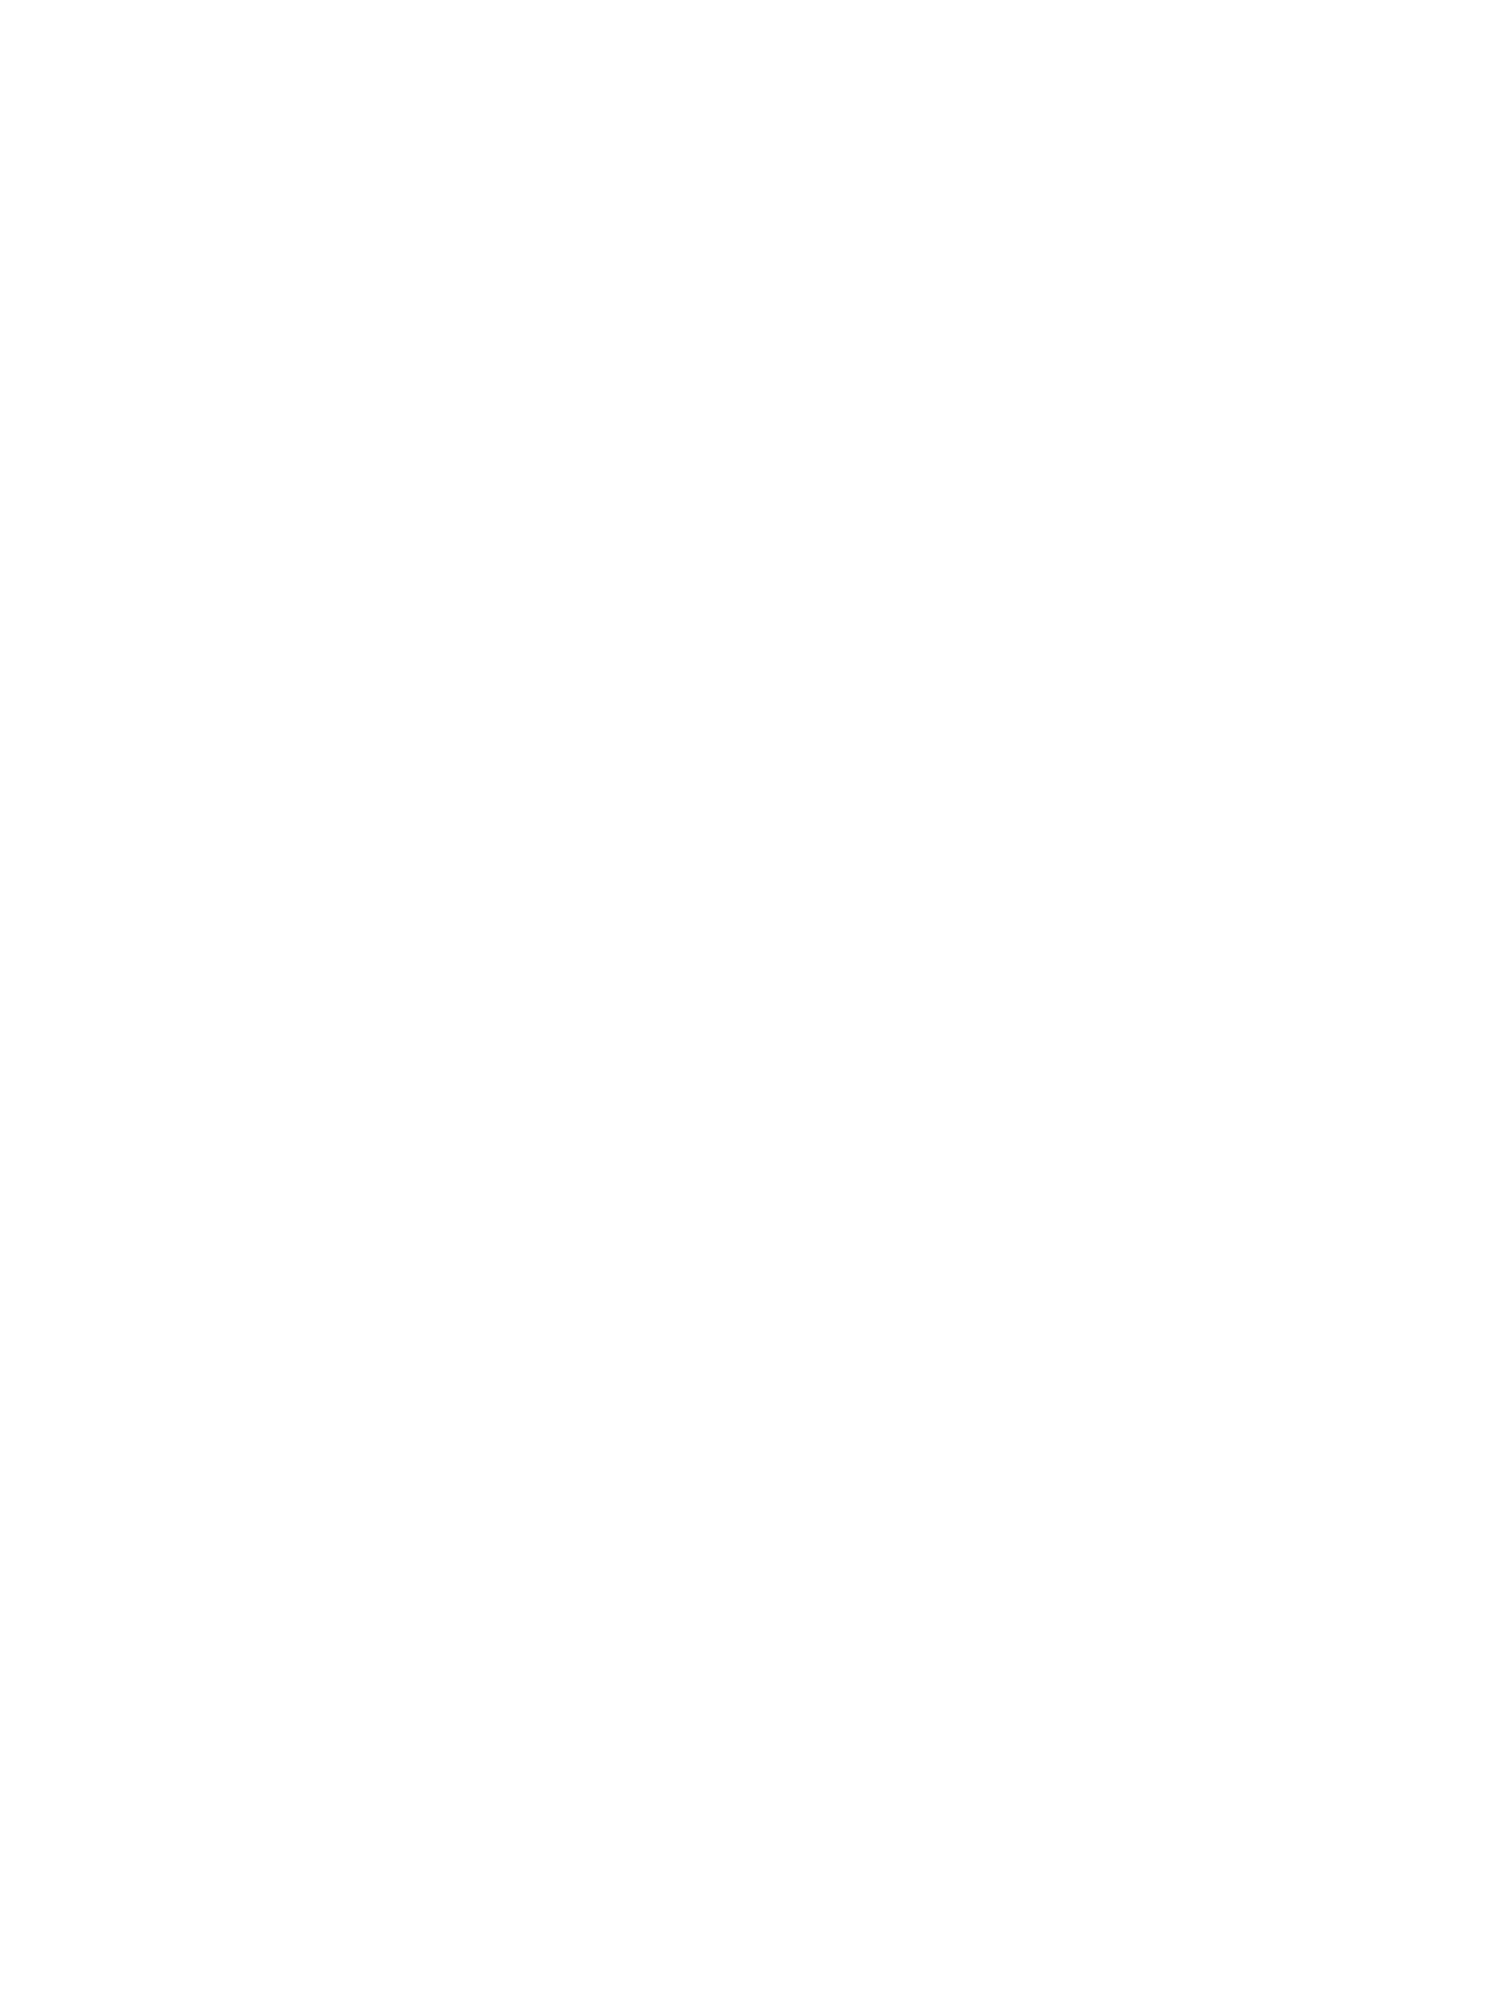 Great Hair For All text